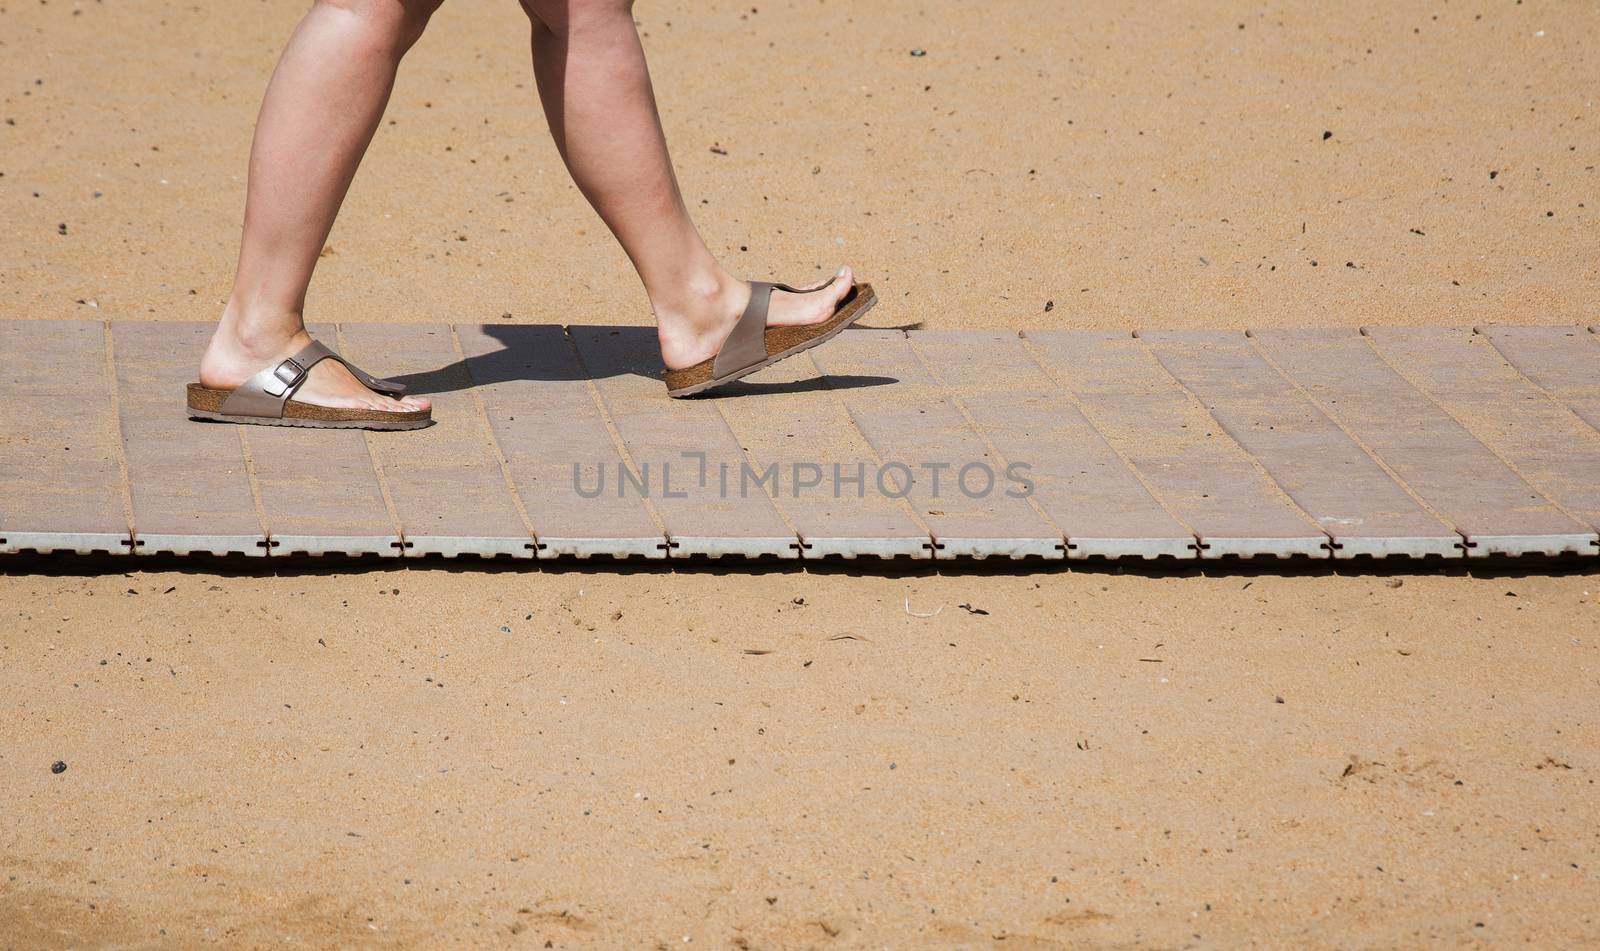 Feet in the summer slates on the beach sand track by Grommik